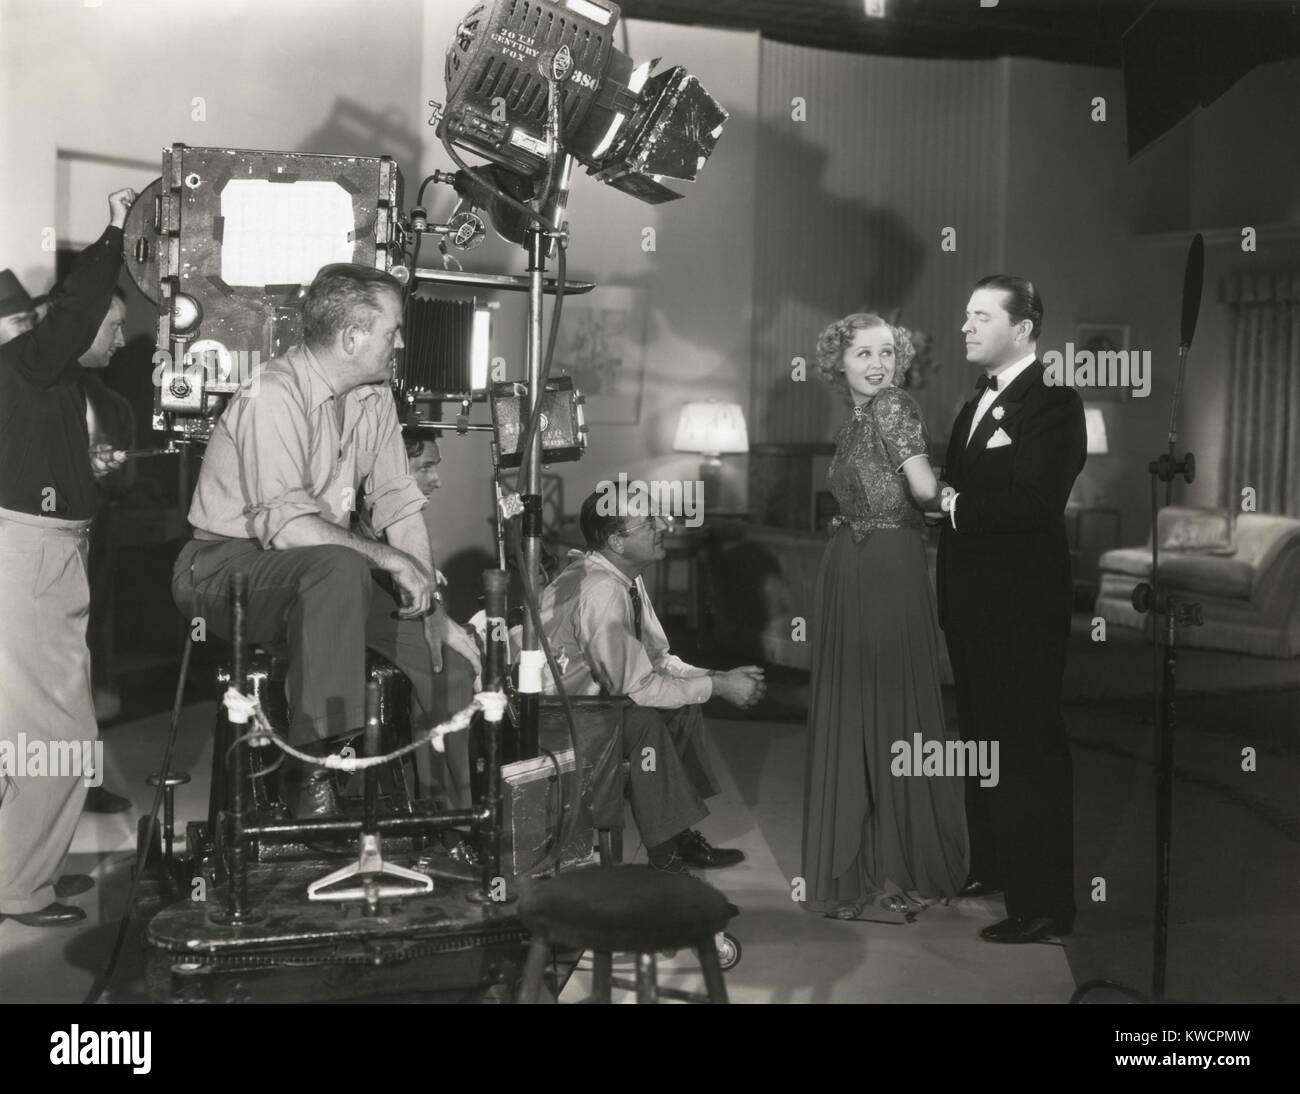 Camera man Don Clark and Director James Tinling film a scene for 'Change of Heart' with Lyle Talbot and Gloria Stuart. 20th Century Fox. Ca. 1938. - (BSLOC 2014 17 123) Stock Photo